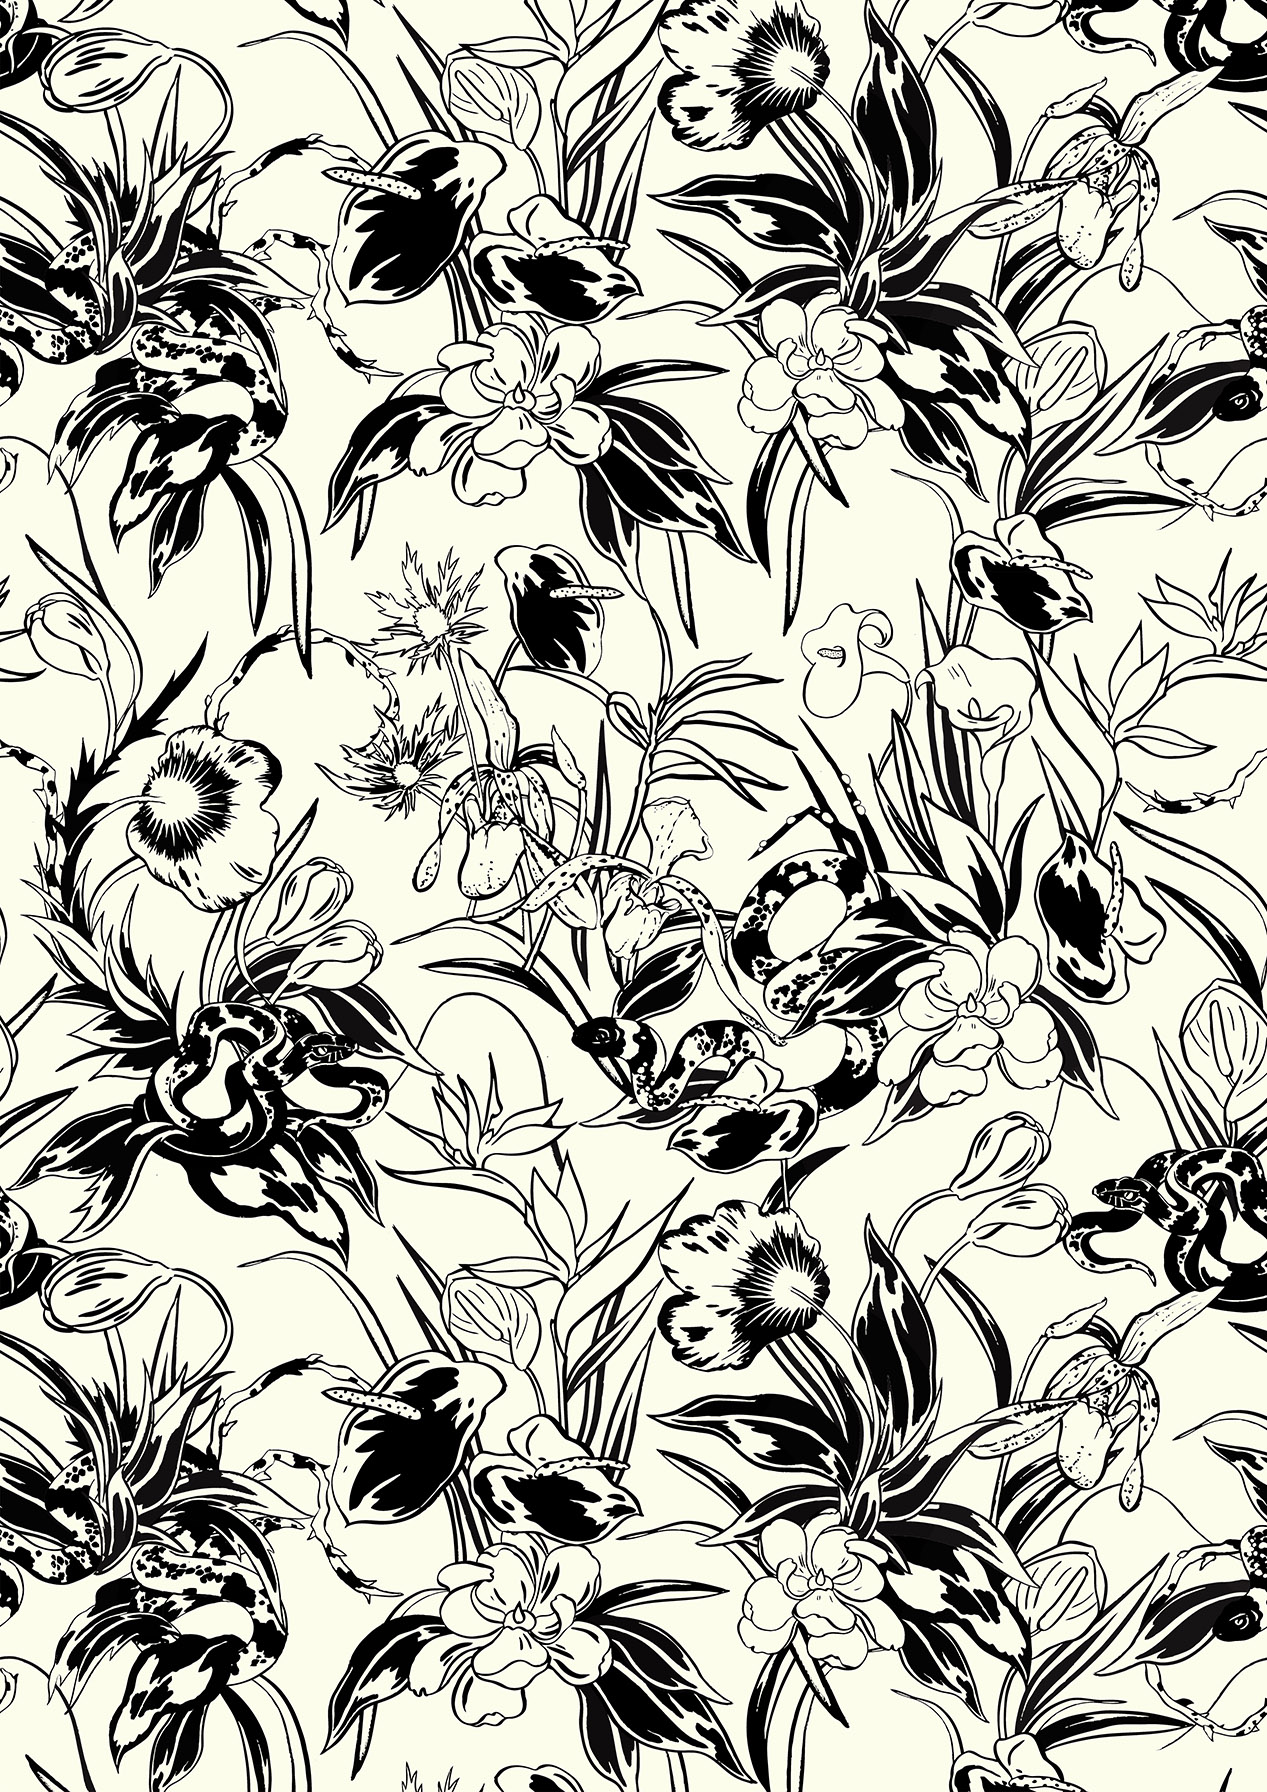 All-over pattern, hand drawn by Em Prové for Olivia von Halle's Garden of Earthly Delights Collection